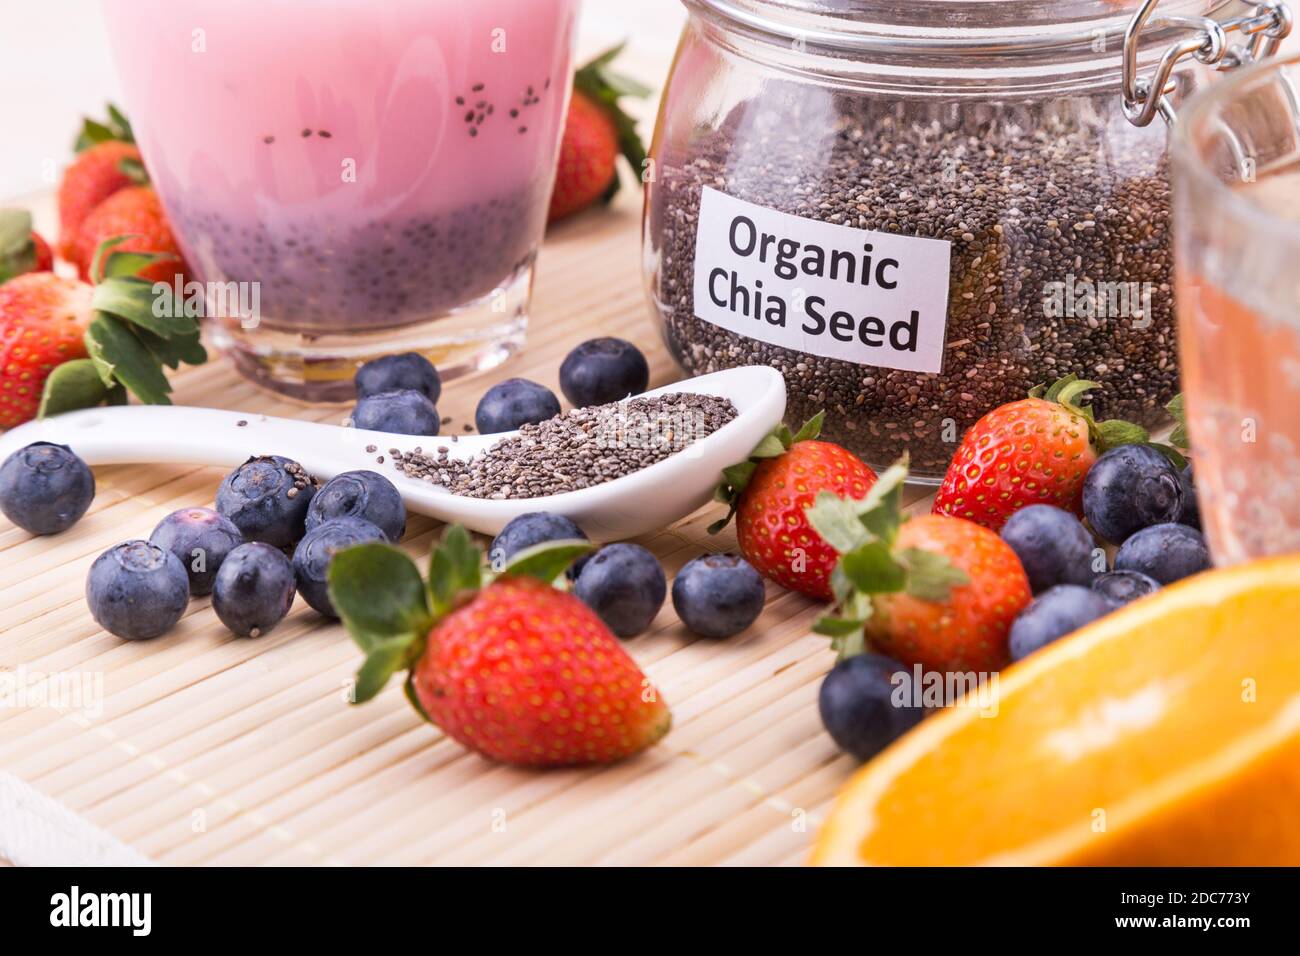 Chia seeds with fresh fruits juice, healthy nutritious anti-oxidant superfood drinks Stock Photo